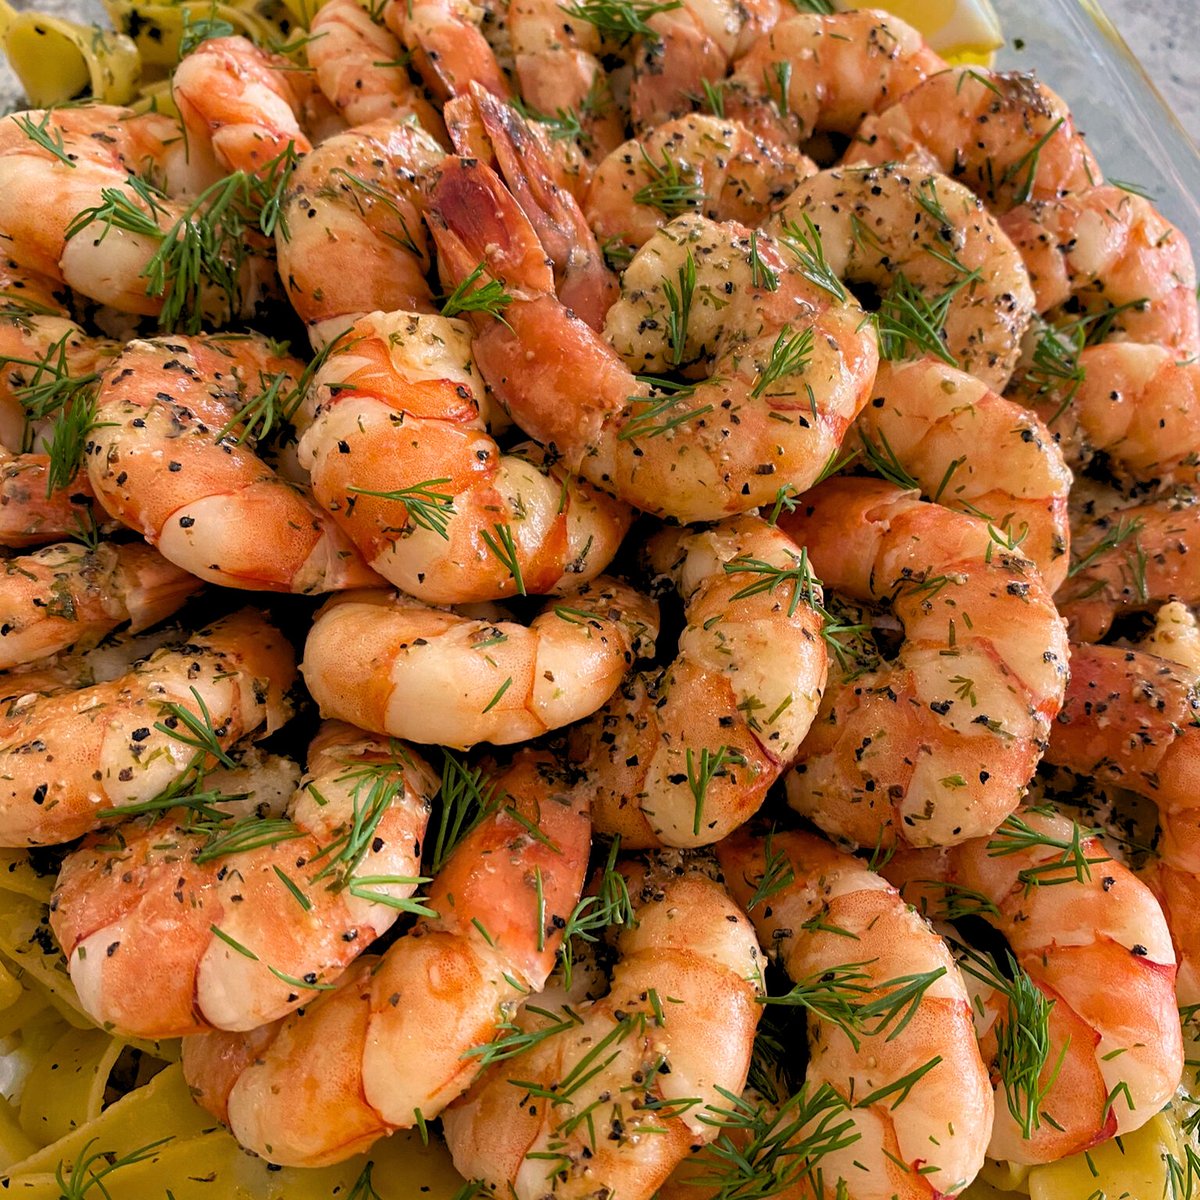 Cheers to National Shrimp Scampi Day! 🍤 Dive into buttery, garlicky goodness. #ShrimpScampiDay #DeliciousIndulgence #PersonalChef #weeklyMealPrep 🌟